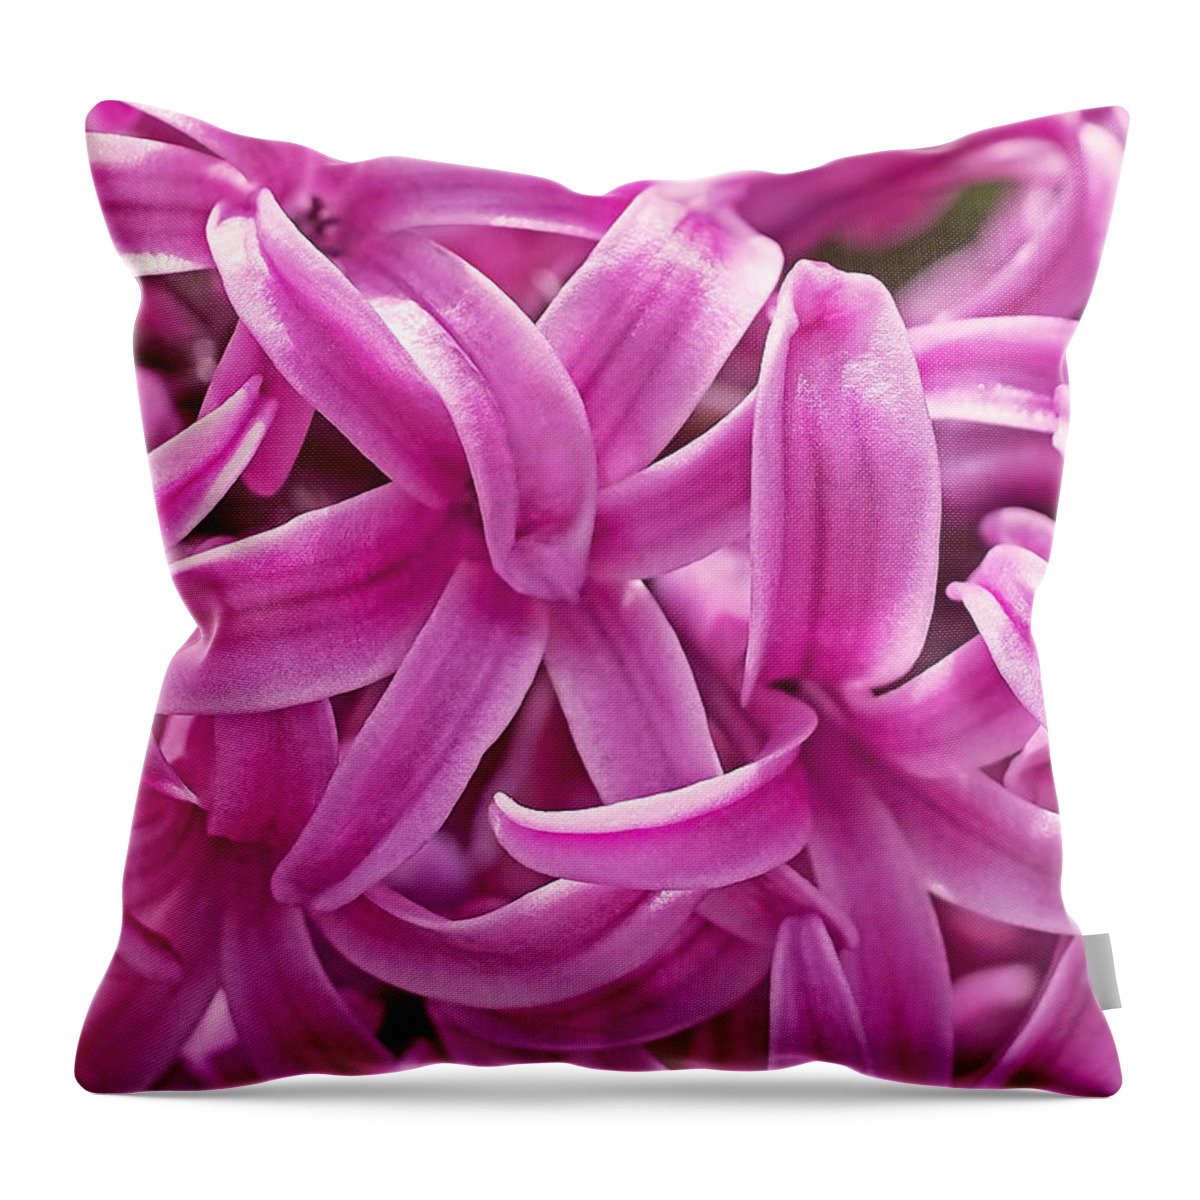 Hyacinth Throw Pillow featuring the photograph Hyacinth Pink Pearl by Rona Black